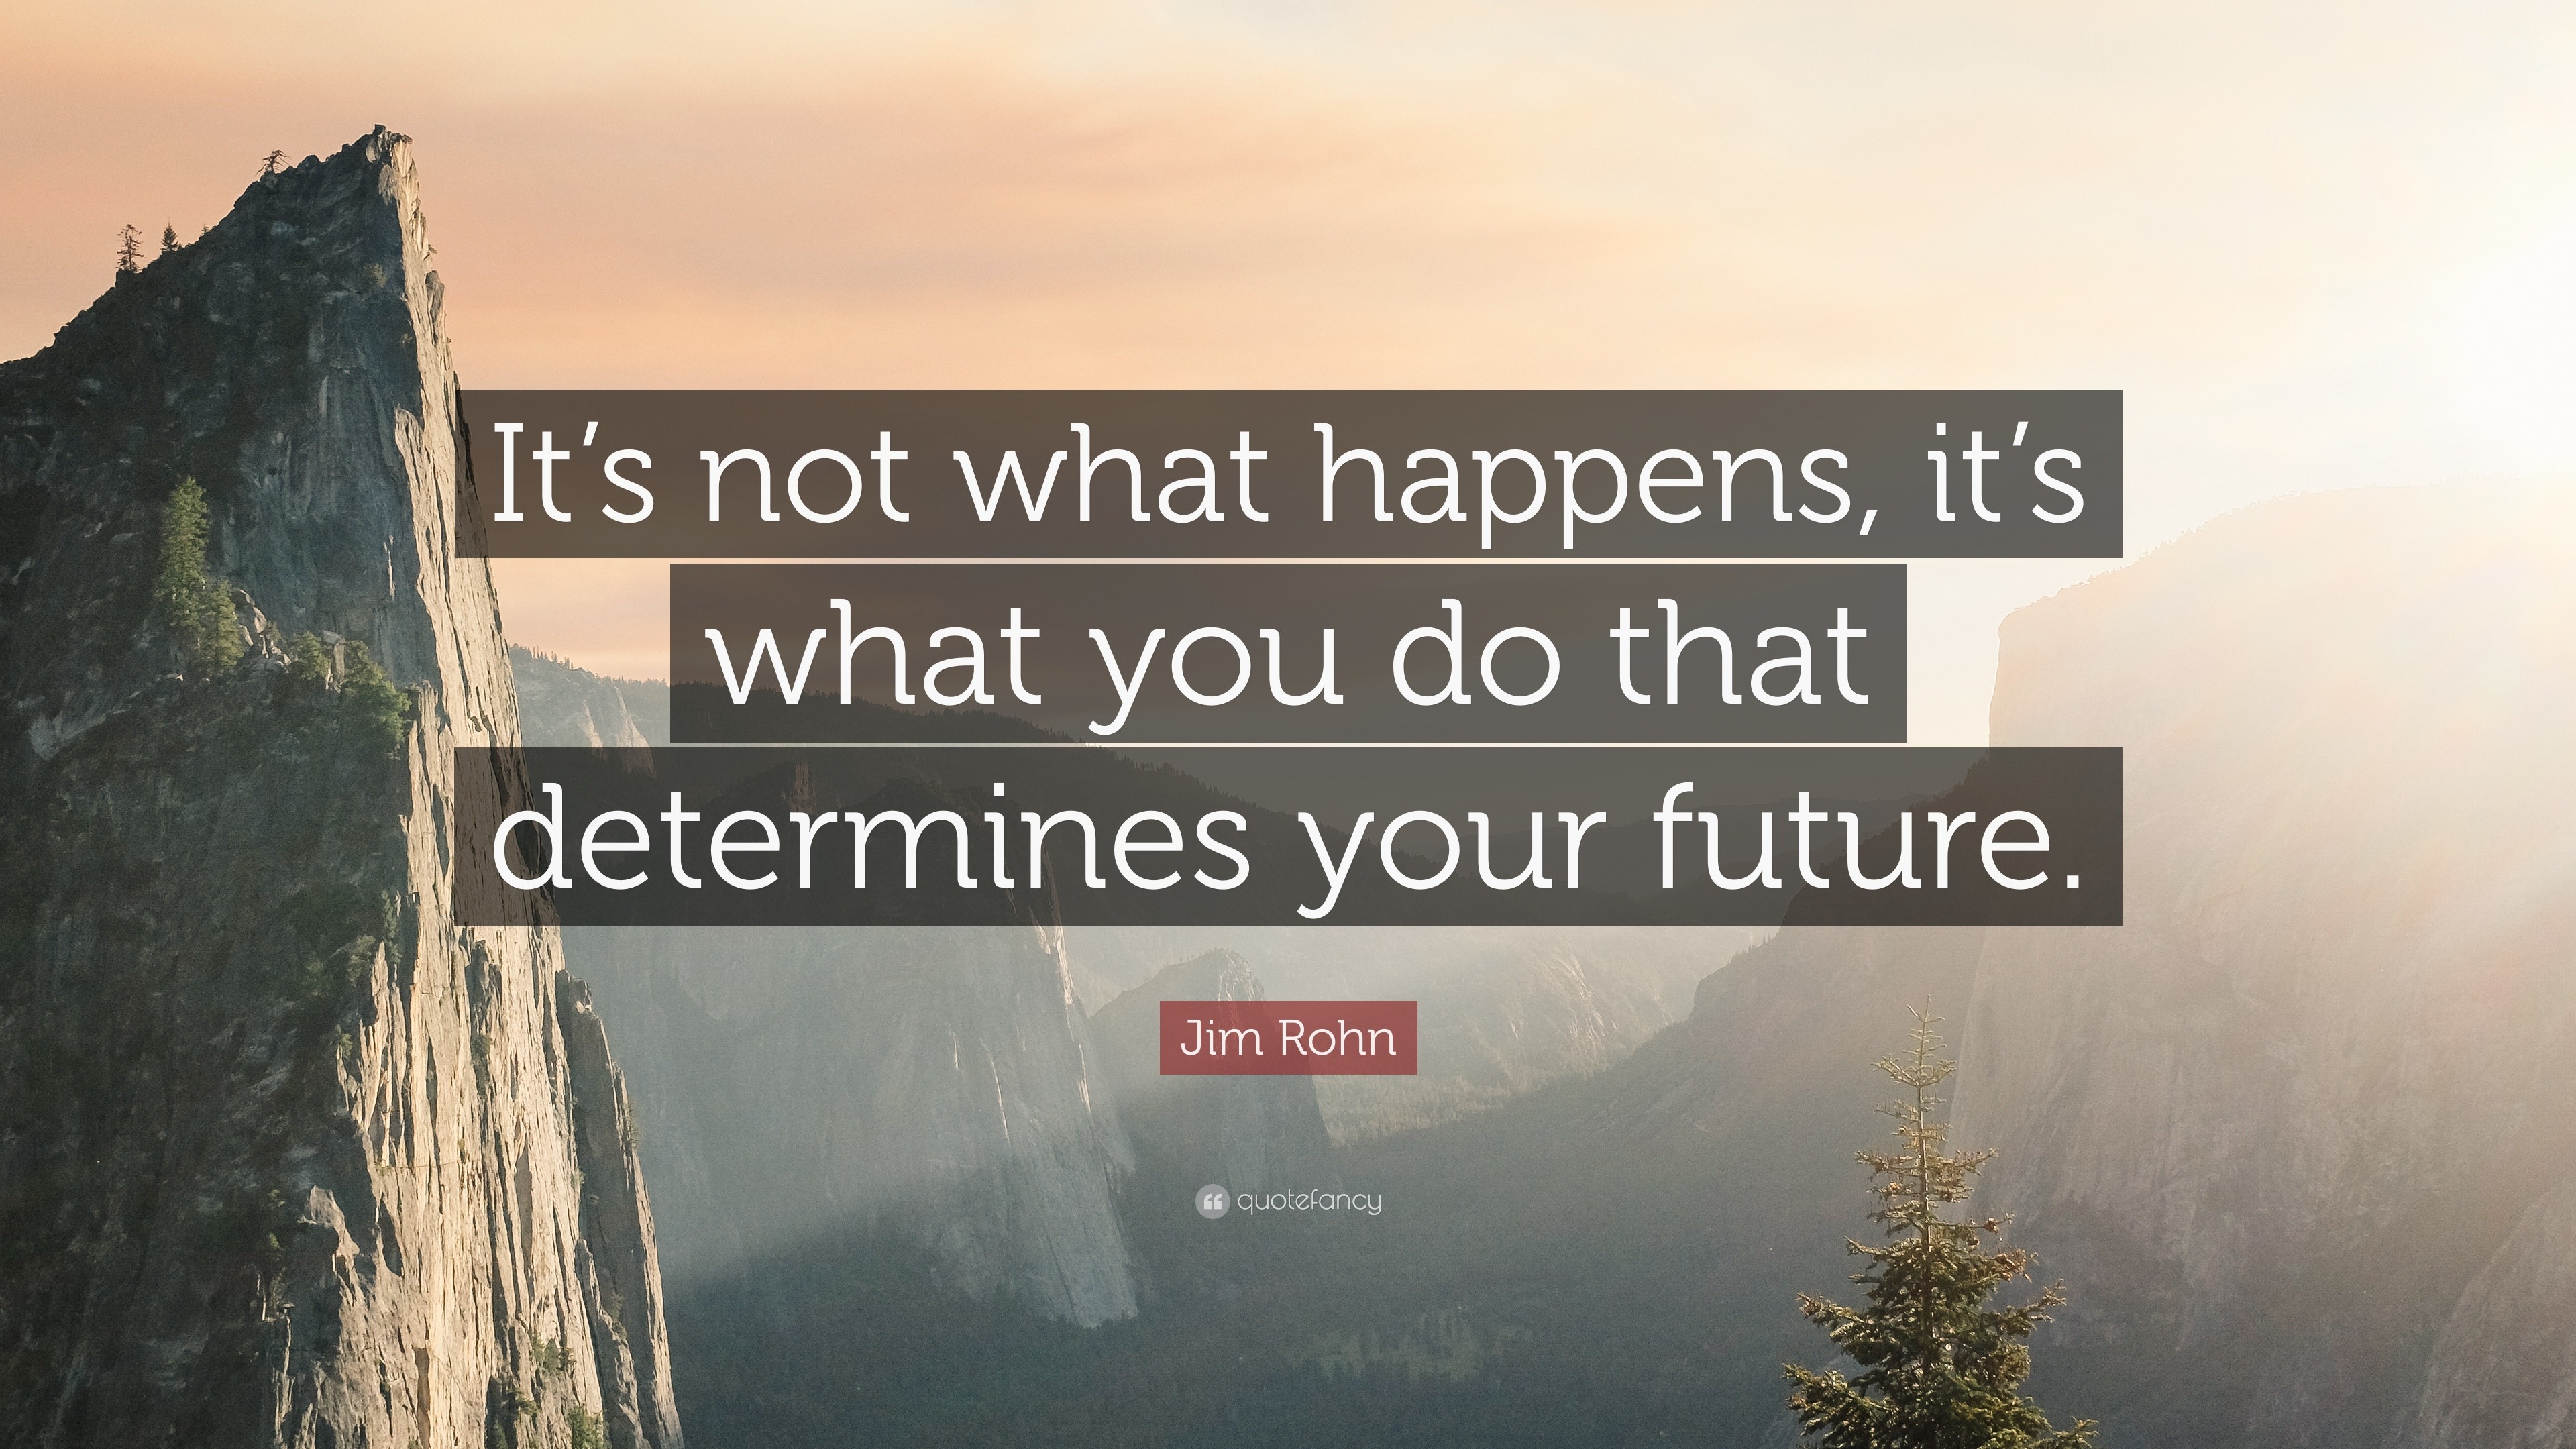 Jim Rohn Quote: “It’s not what happens, it’s what you do that ...